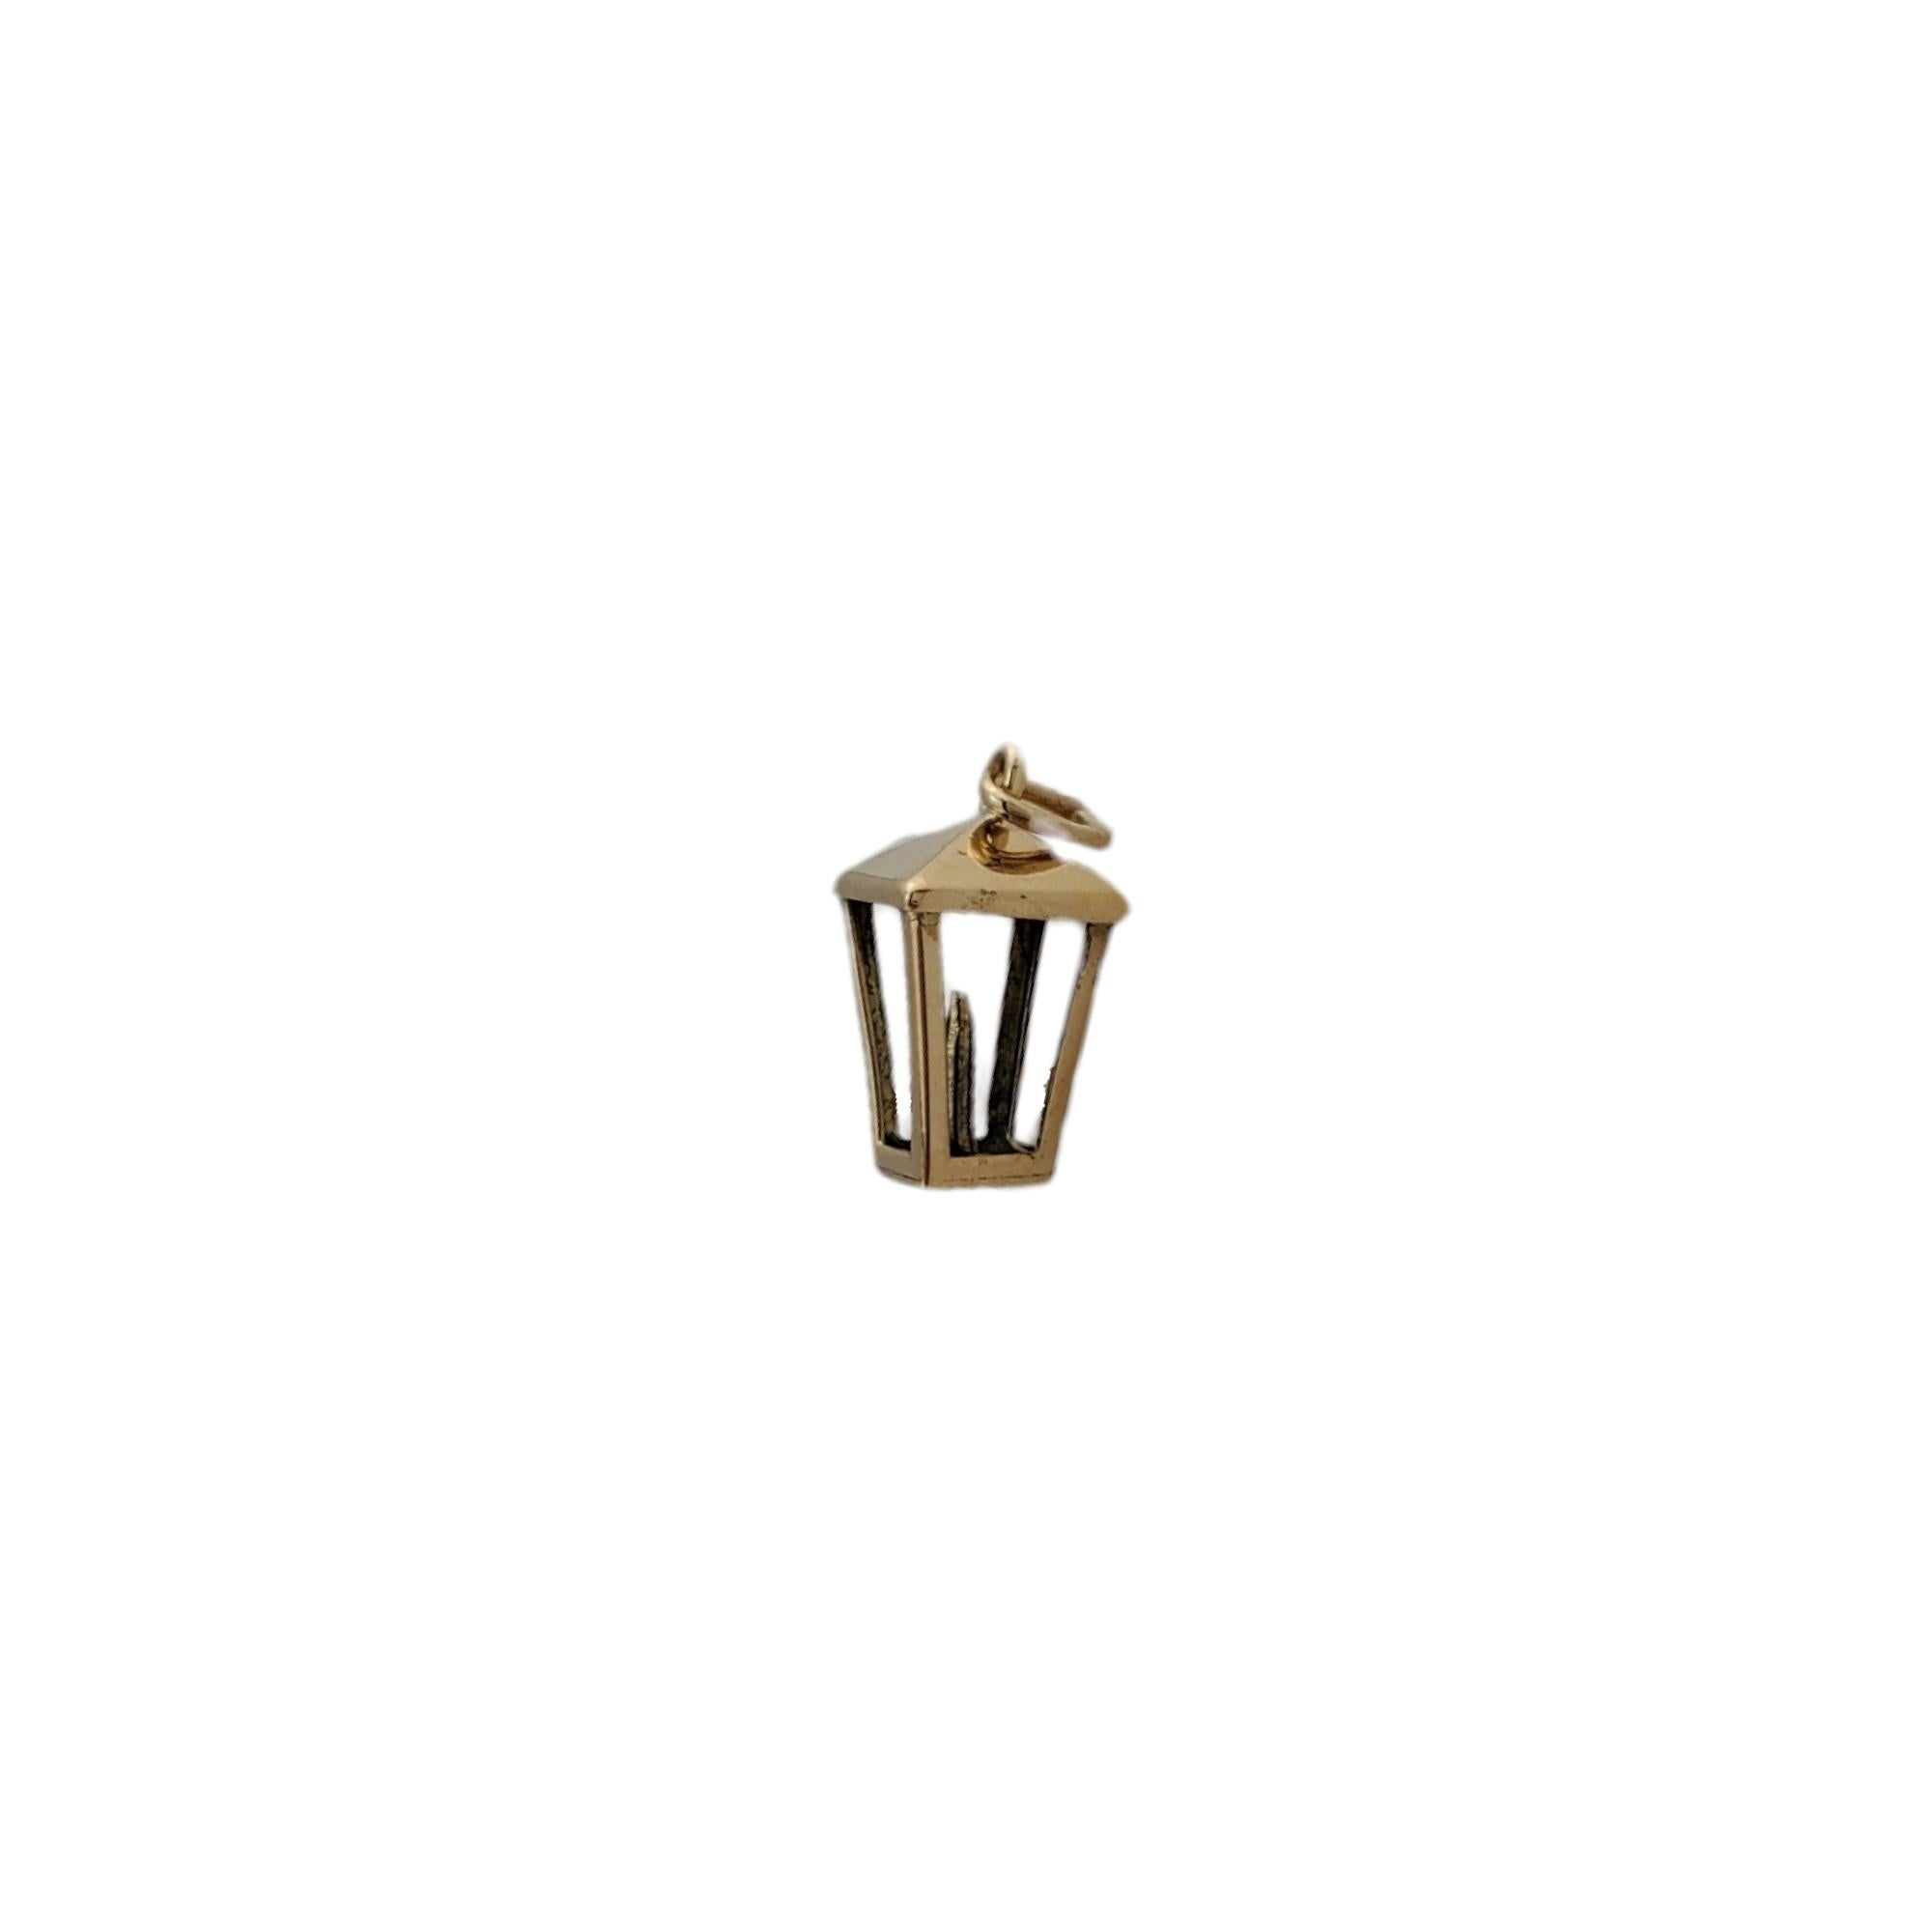 14K Yellow Gold Lantern Charm 

You'll love this beautiful yellow gold lantern charm! 

Size: 7.73mm X 13.74mm

Weight:  0.6gr / 0.3 dwt

Hallmark: 14K 

Very good condition, professionally polished.

Will come packaged in a gift box and will be